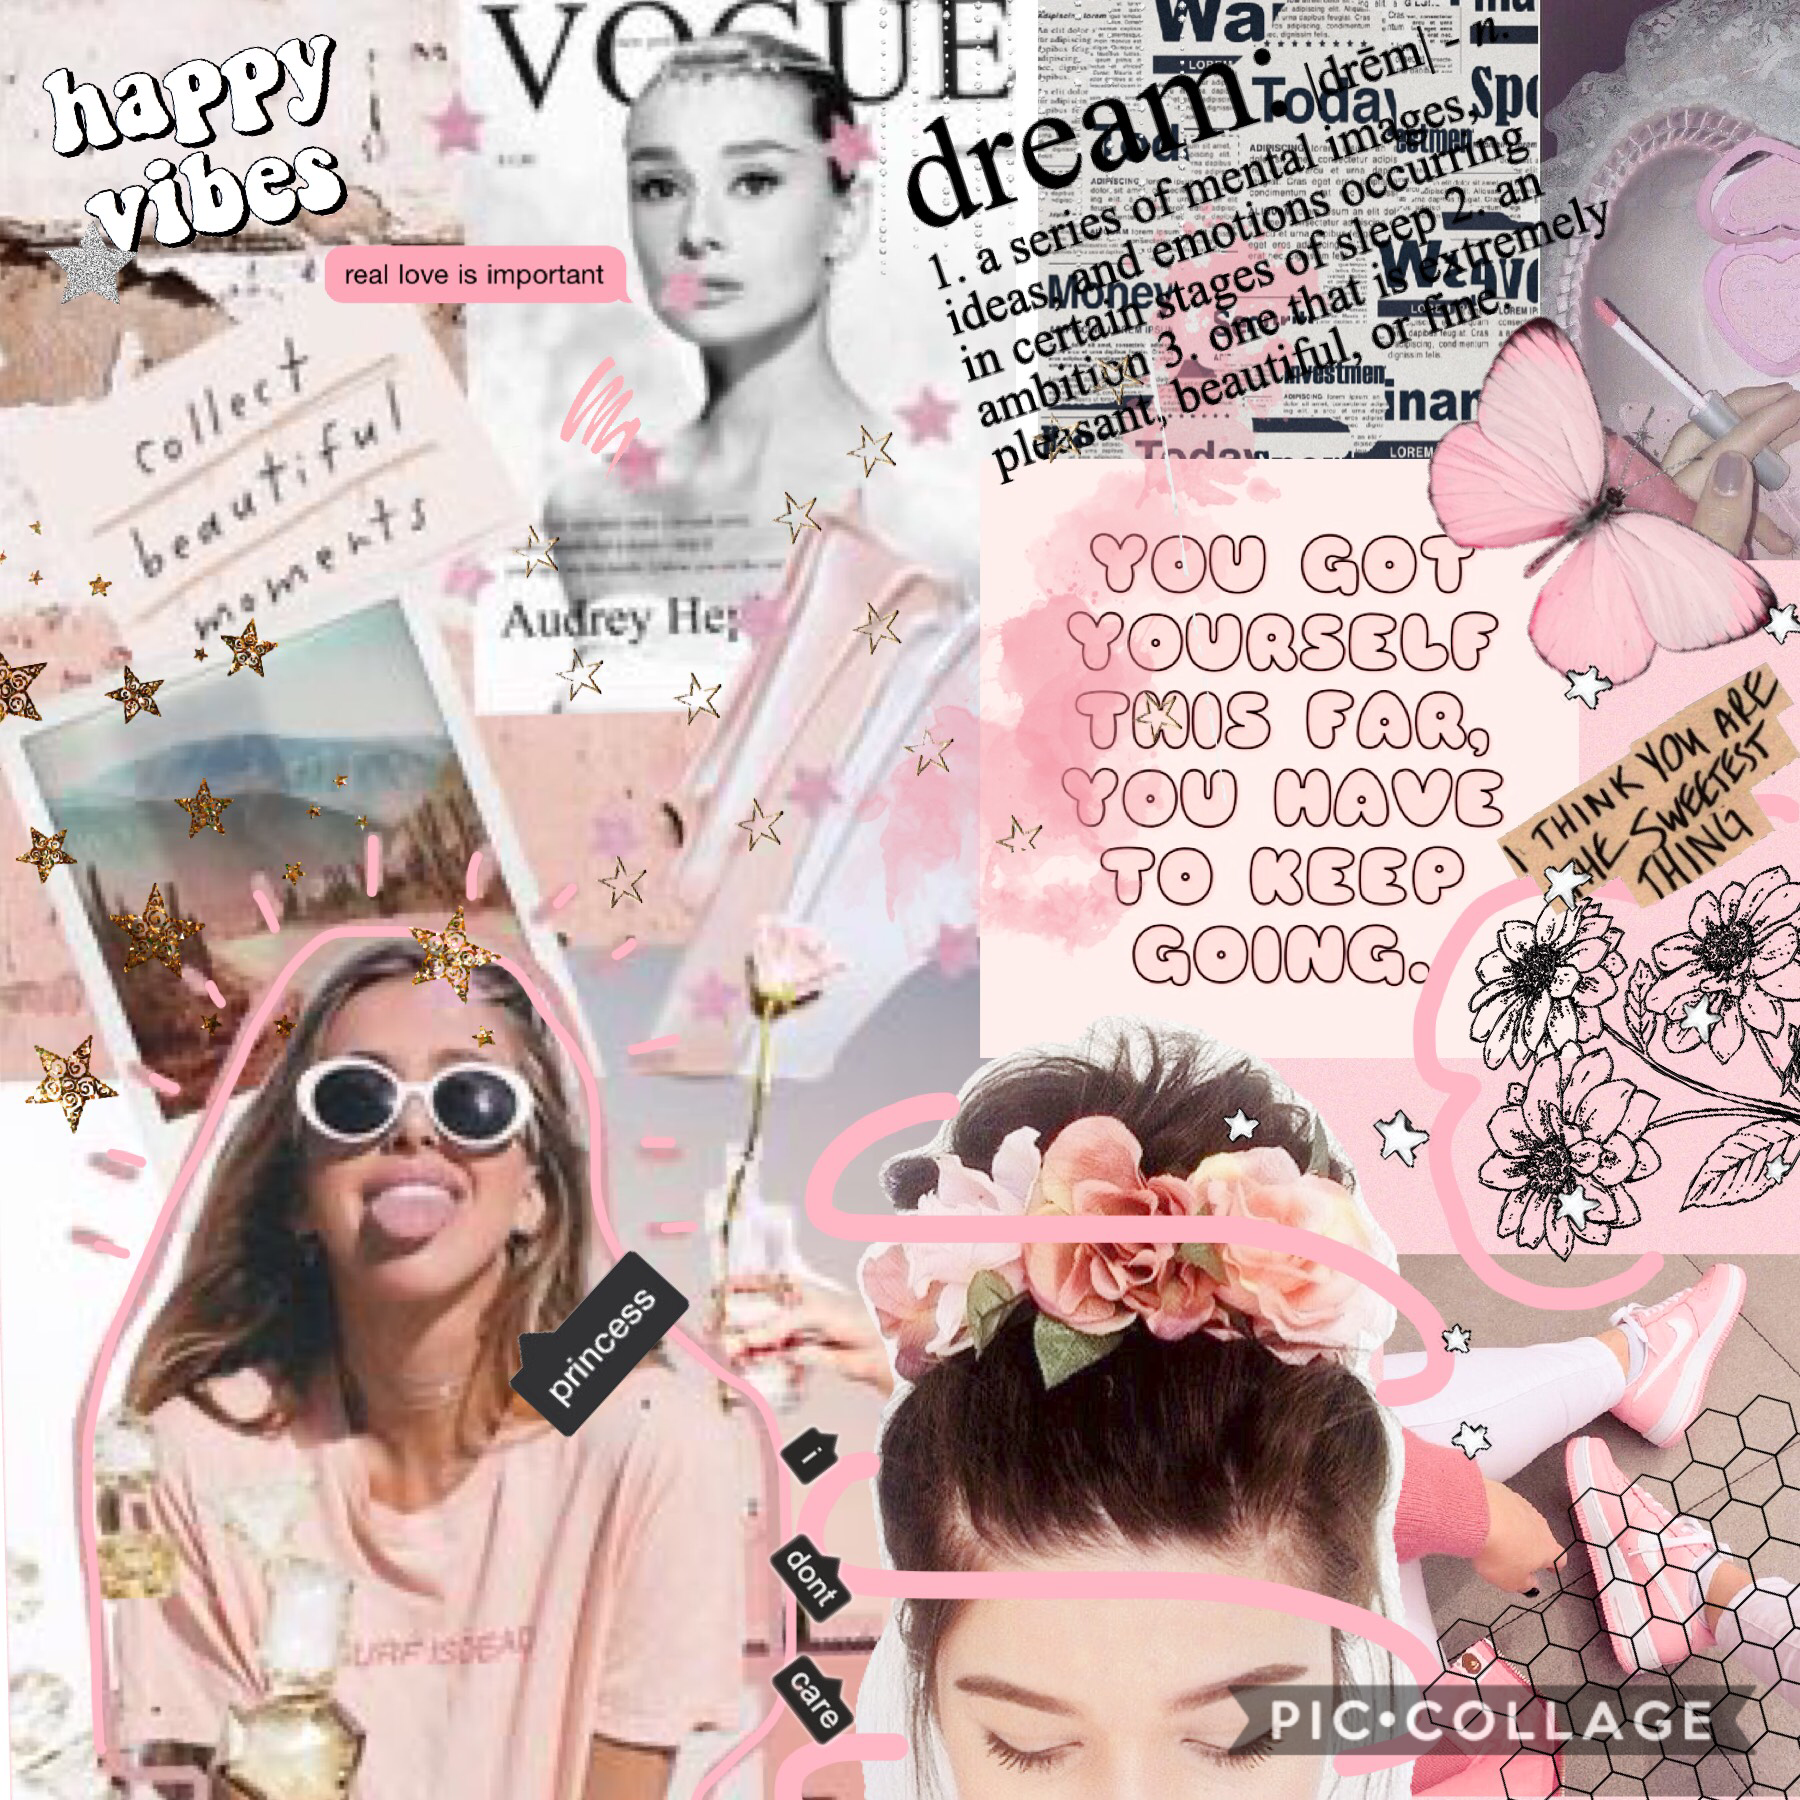 💗🌺🌸PINK🌸🌺💗
No text in this collage 
What do u think